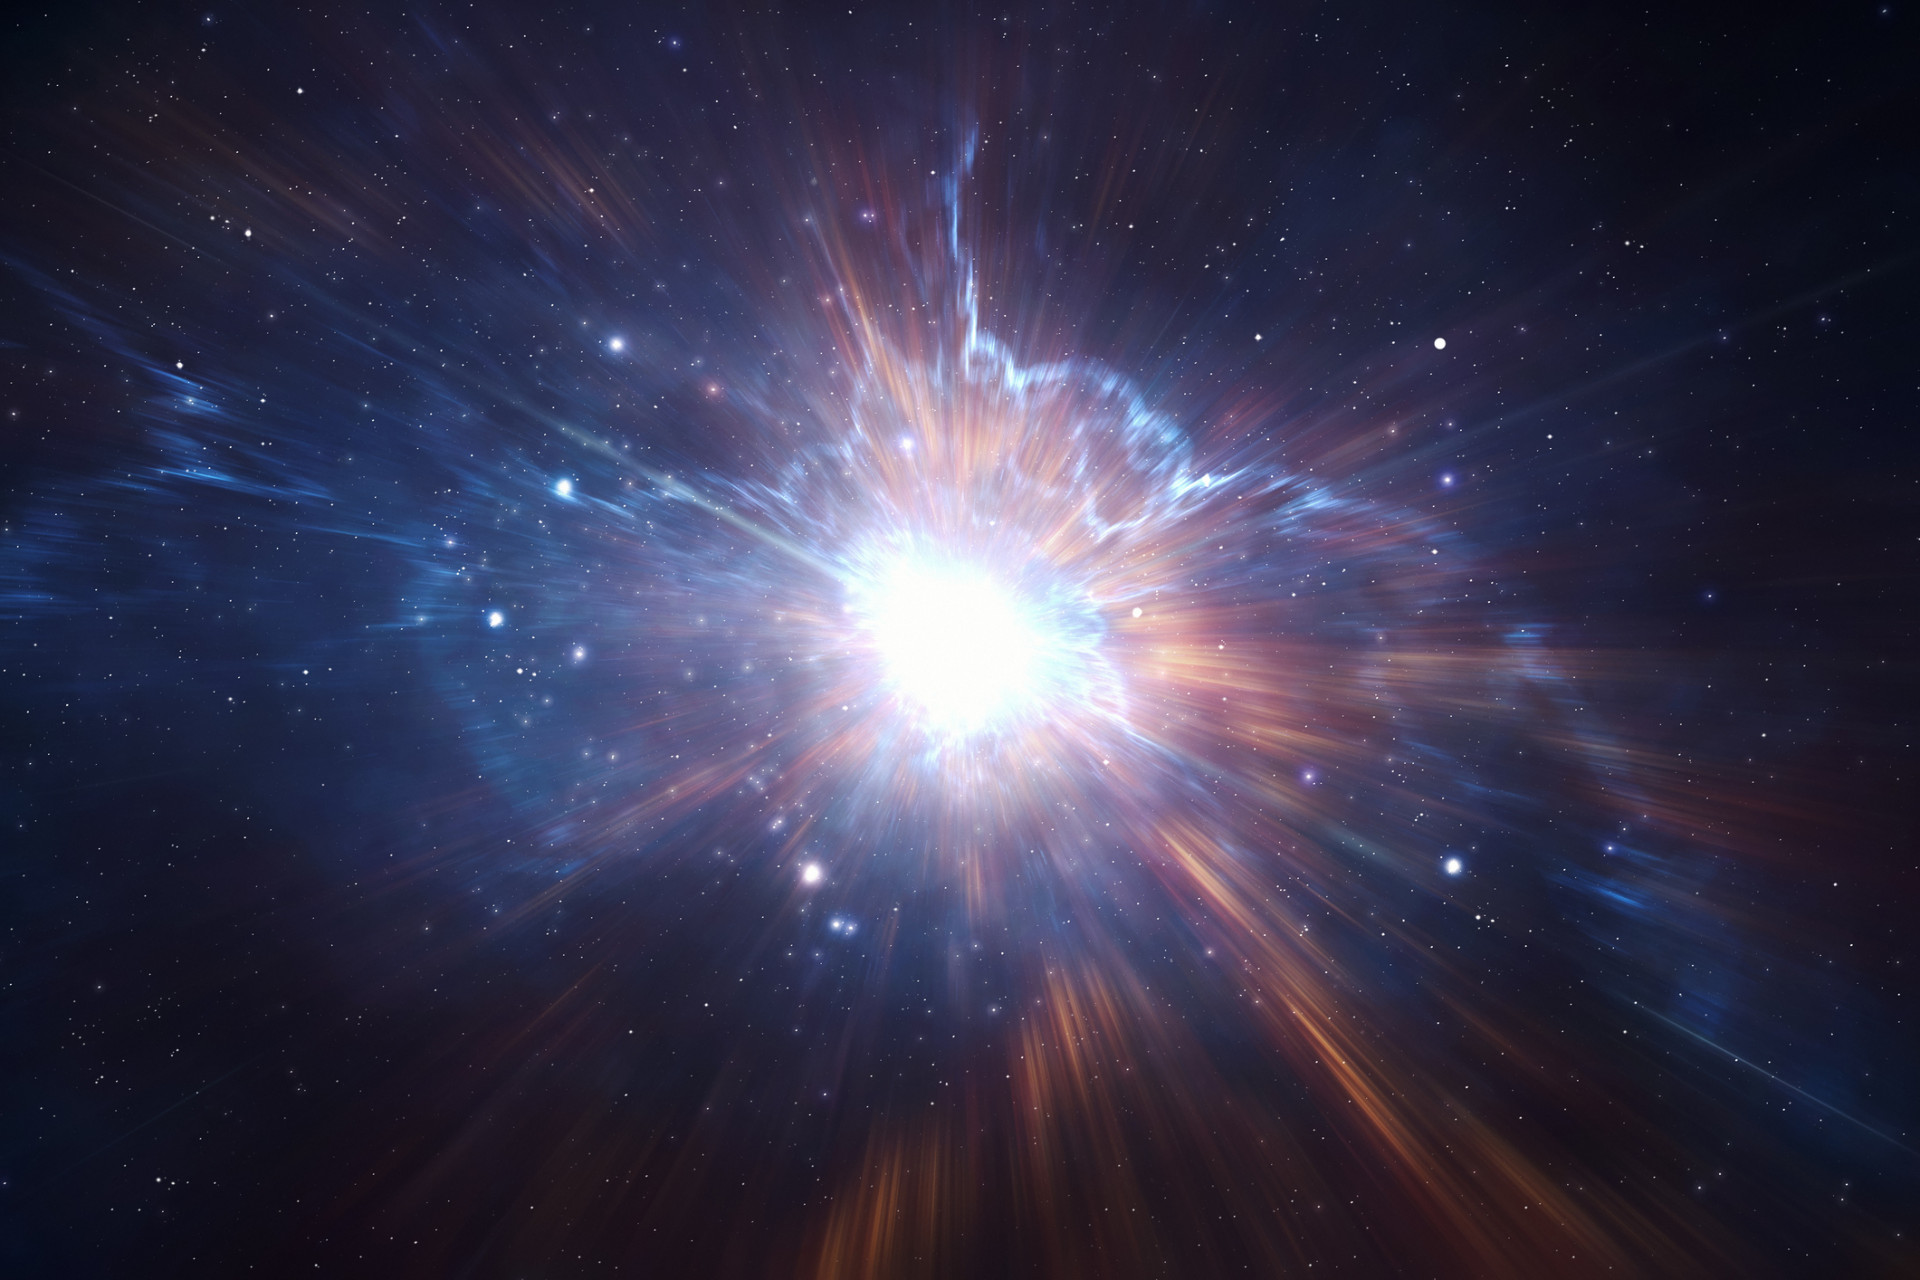 Astronomers have discovered such a powerful explosion in the Universe that they cannot explain its cause